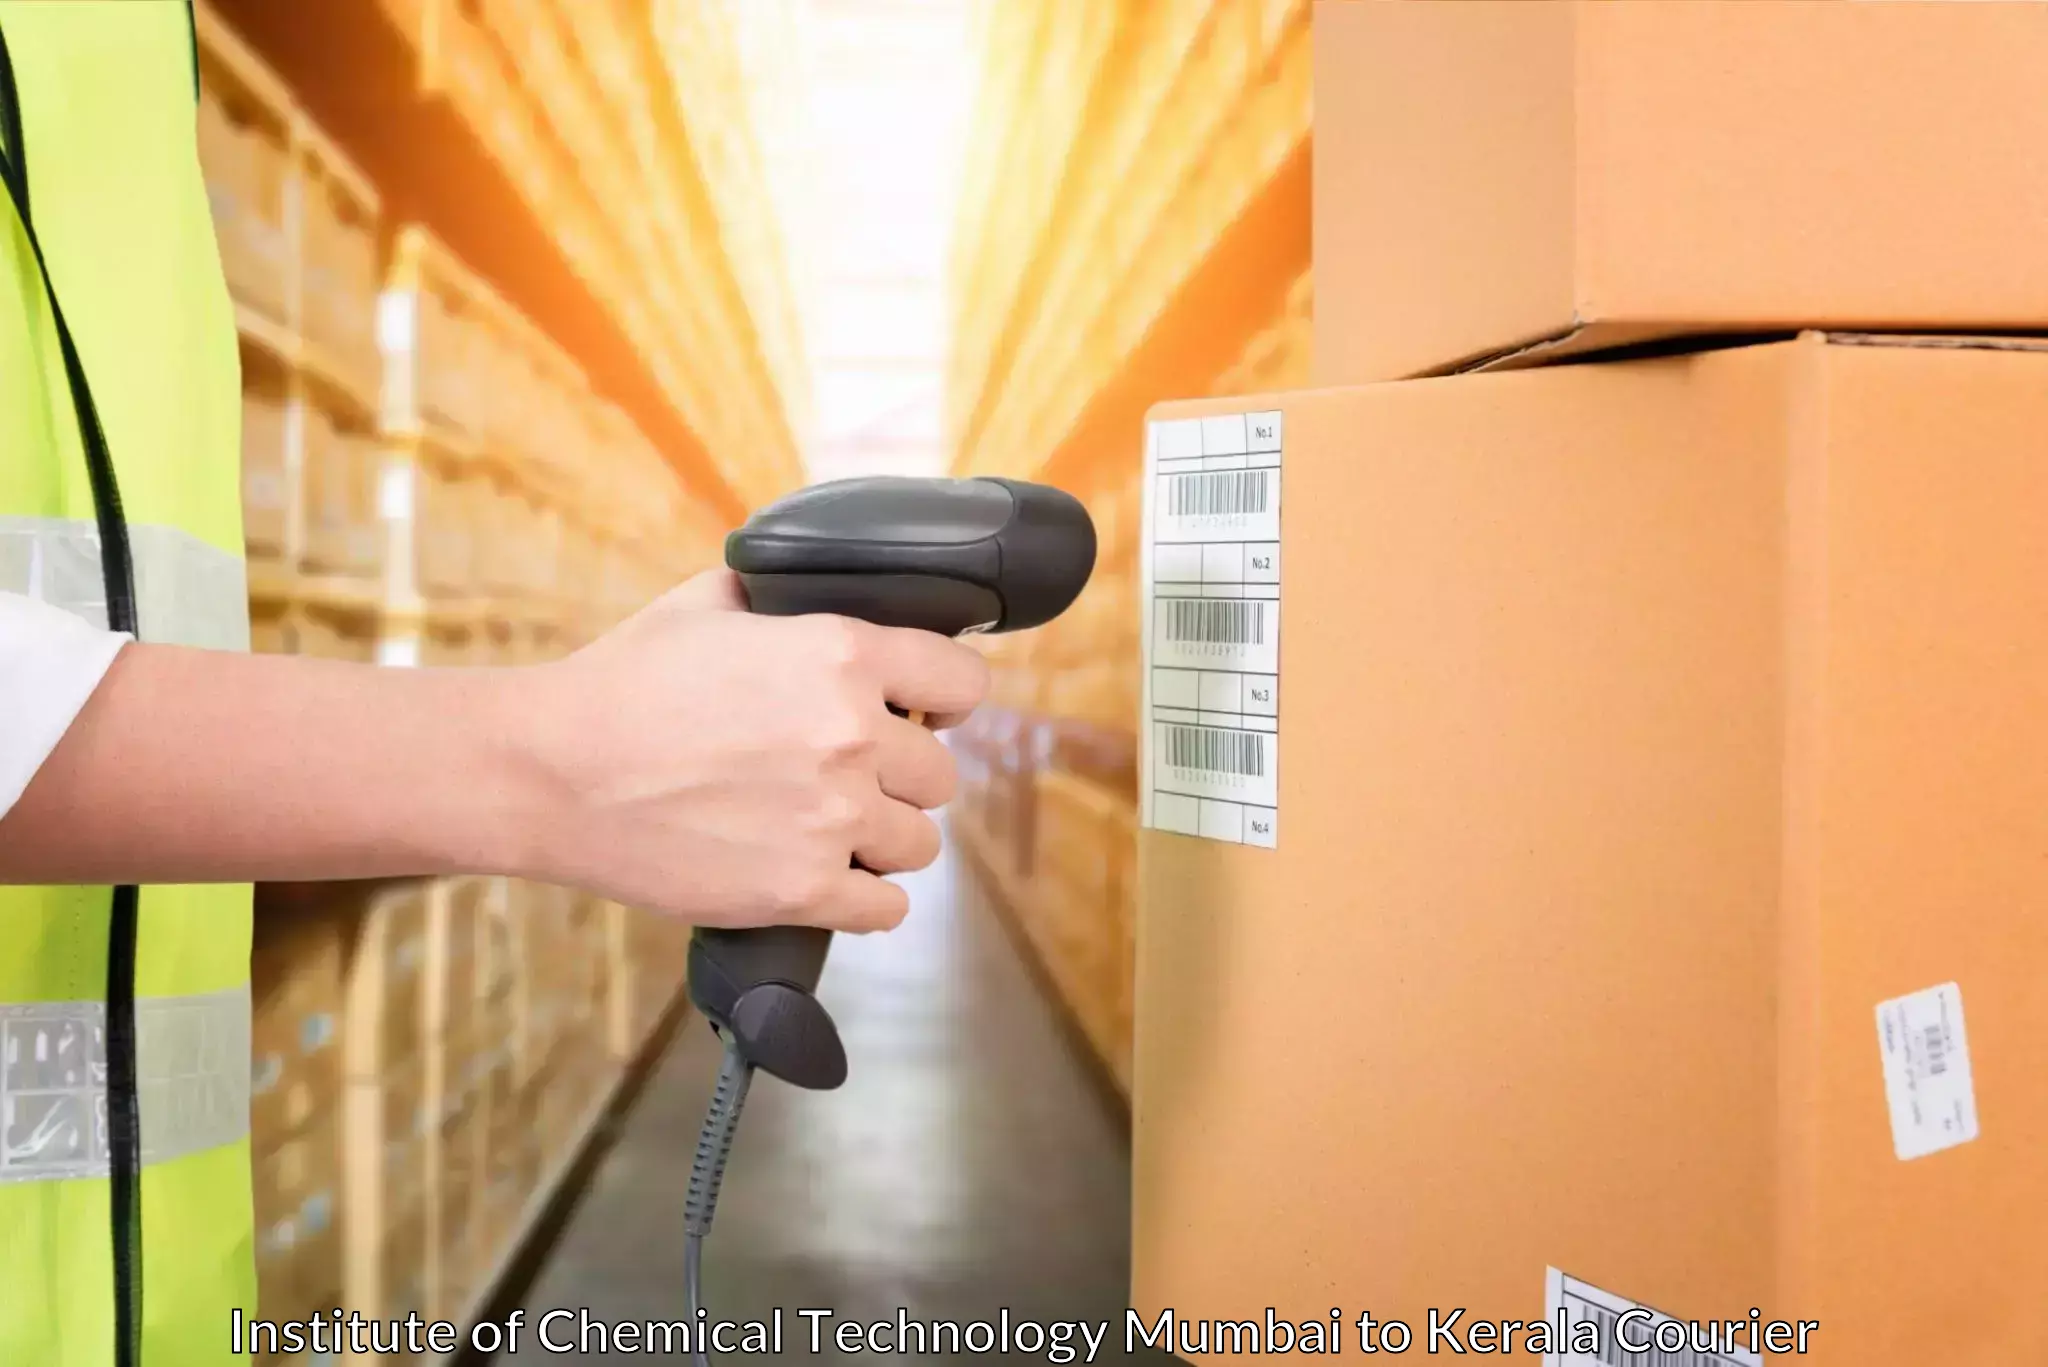 Parcel handling and care Institute of Chemical Technology Mumbai to Chungathara